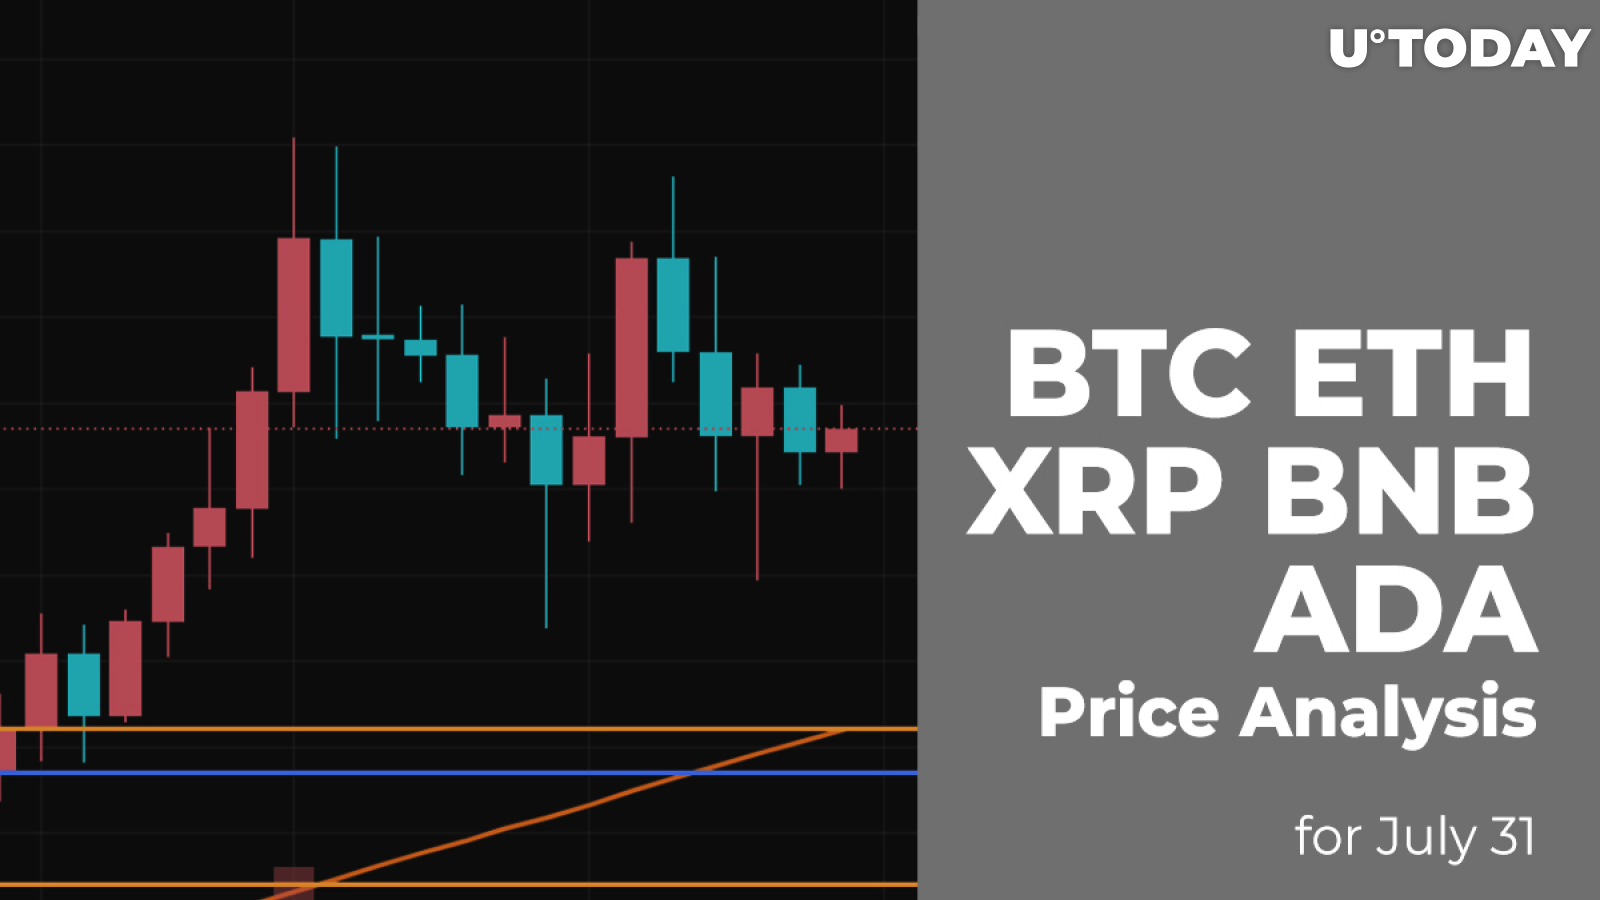 BTC, ETH, XRP, BNB and ADA Price Analysis for July 31